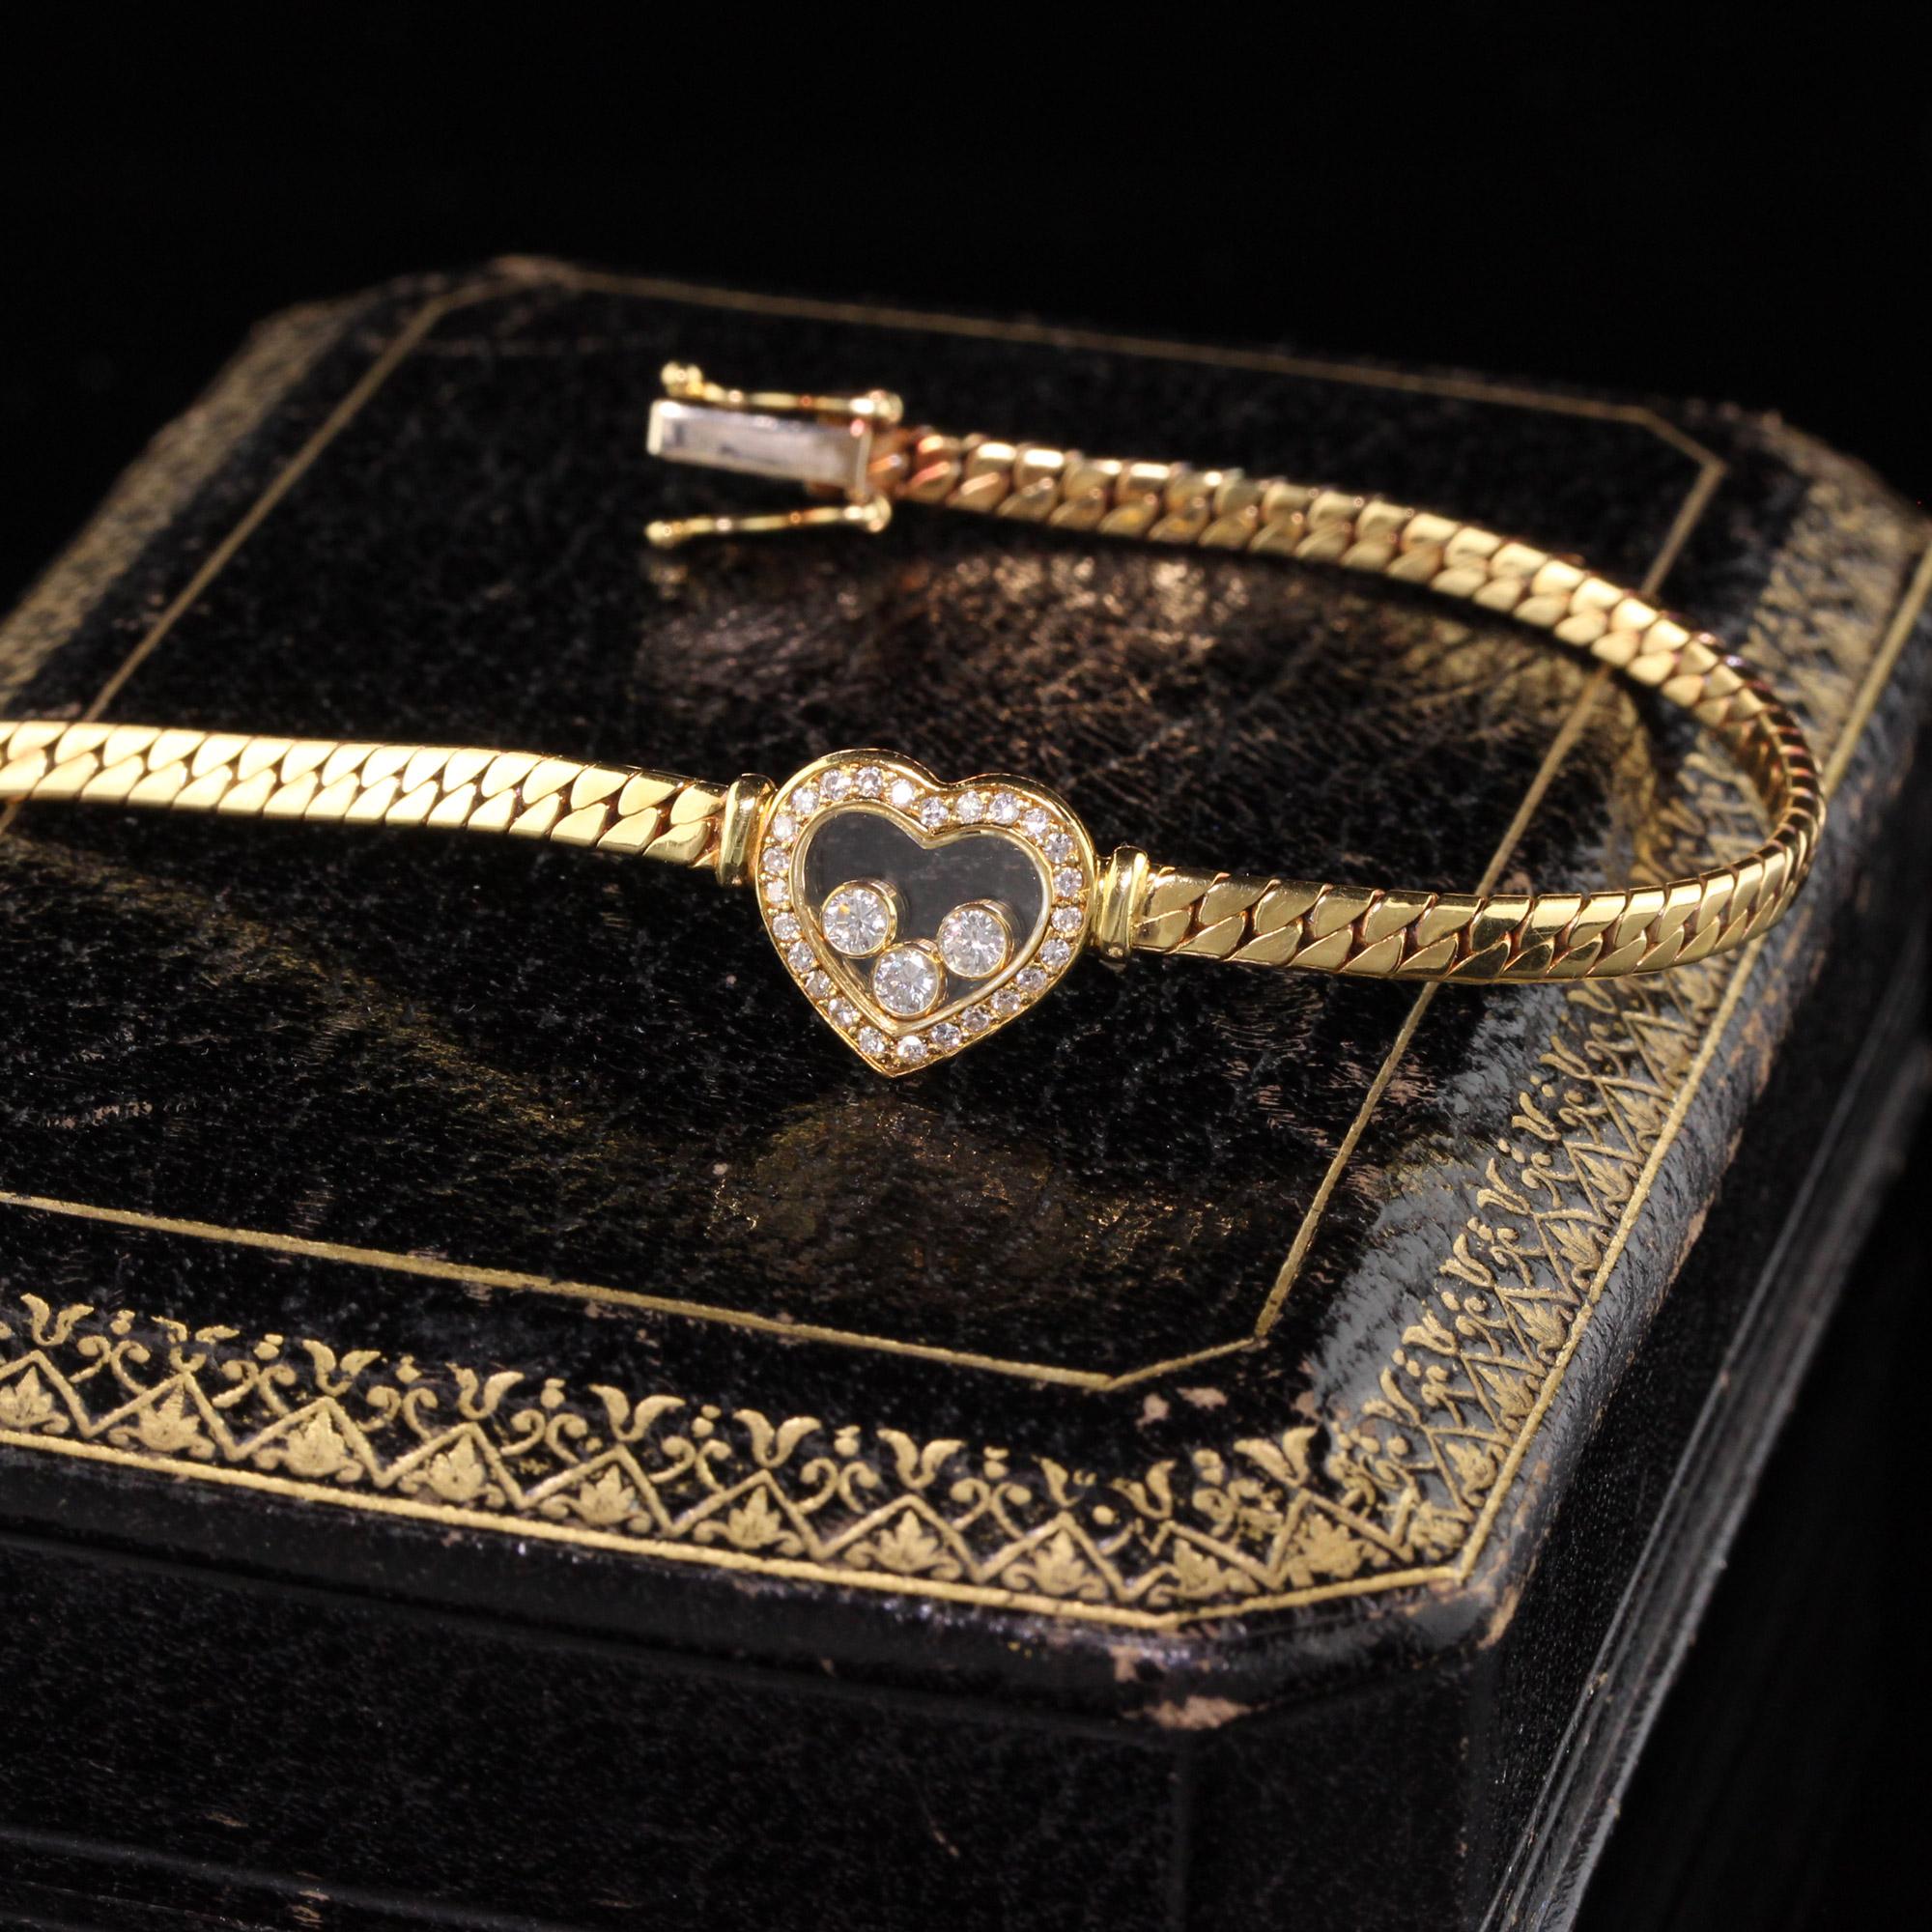 Stunning Chopard Happy diamonds heart bracelet. The heart contains 3 floating diamonds inside of the glass case.

#B0014

Metal: 18K Yellow Gold

Weight: 12.2 Grams

Measurements: 7.3 inches in length

Heart Measurements: 11.7 x 10.7 mm